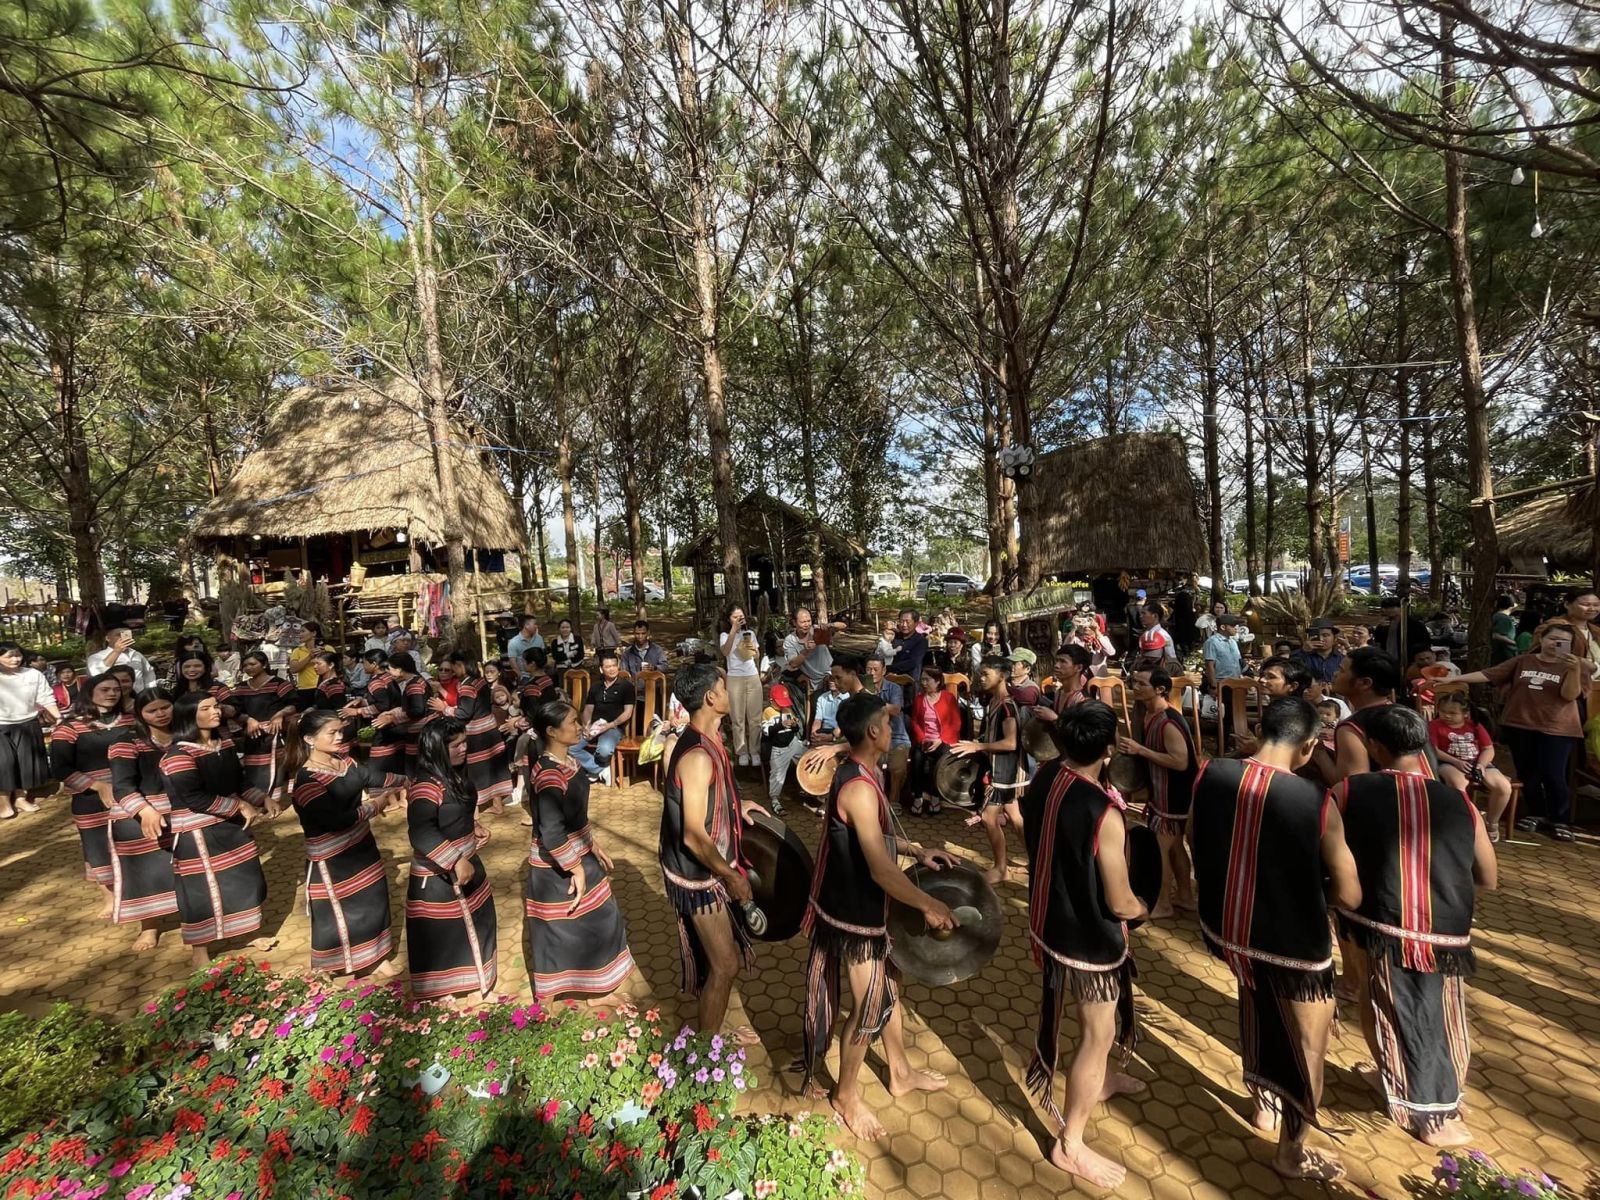 The team of young artisans in Kon Vong Kia village preserves the culture of Gongs and Xoang dance